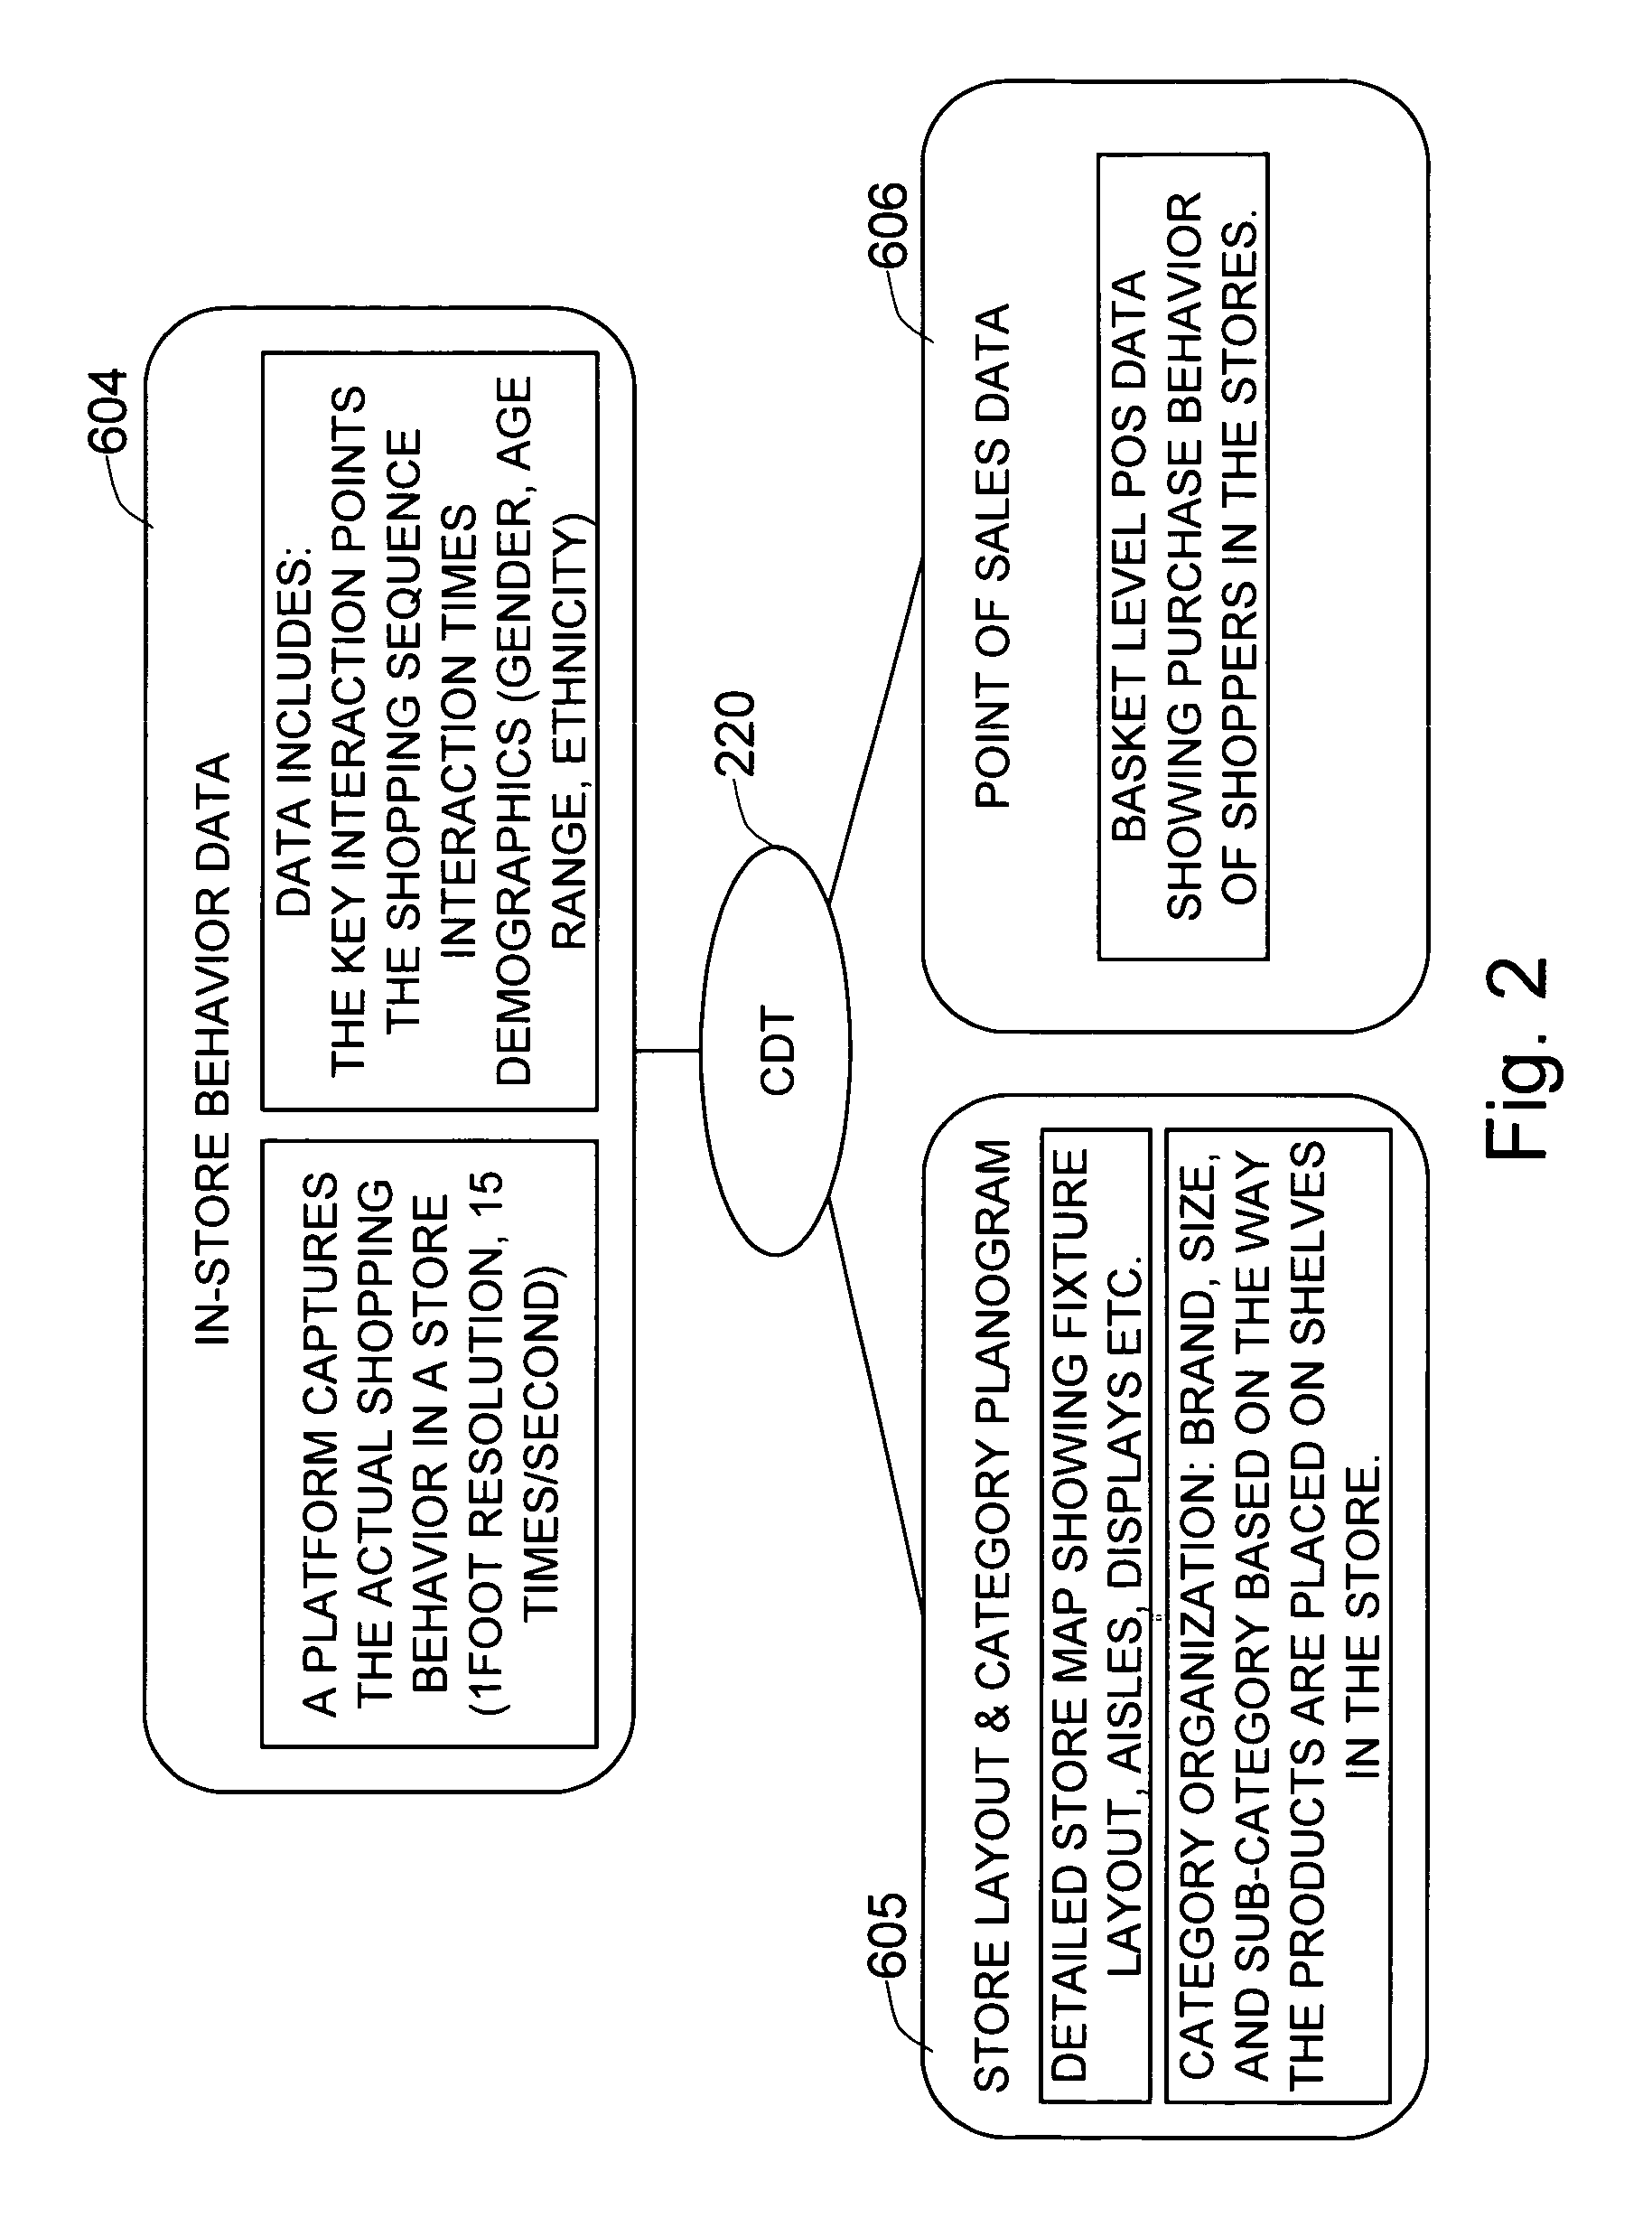 Method and system for building a consumer decision tree in a hierarchical decision tree structure based on in-store behavior analysis